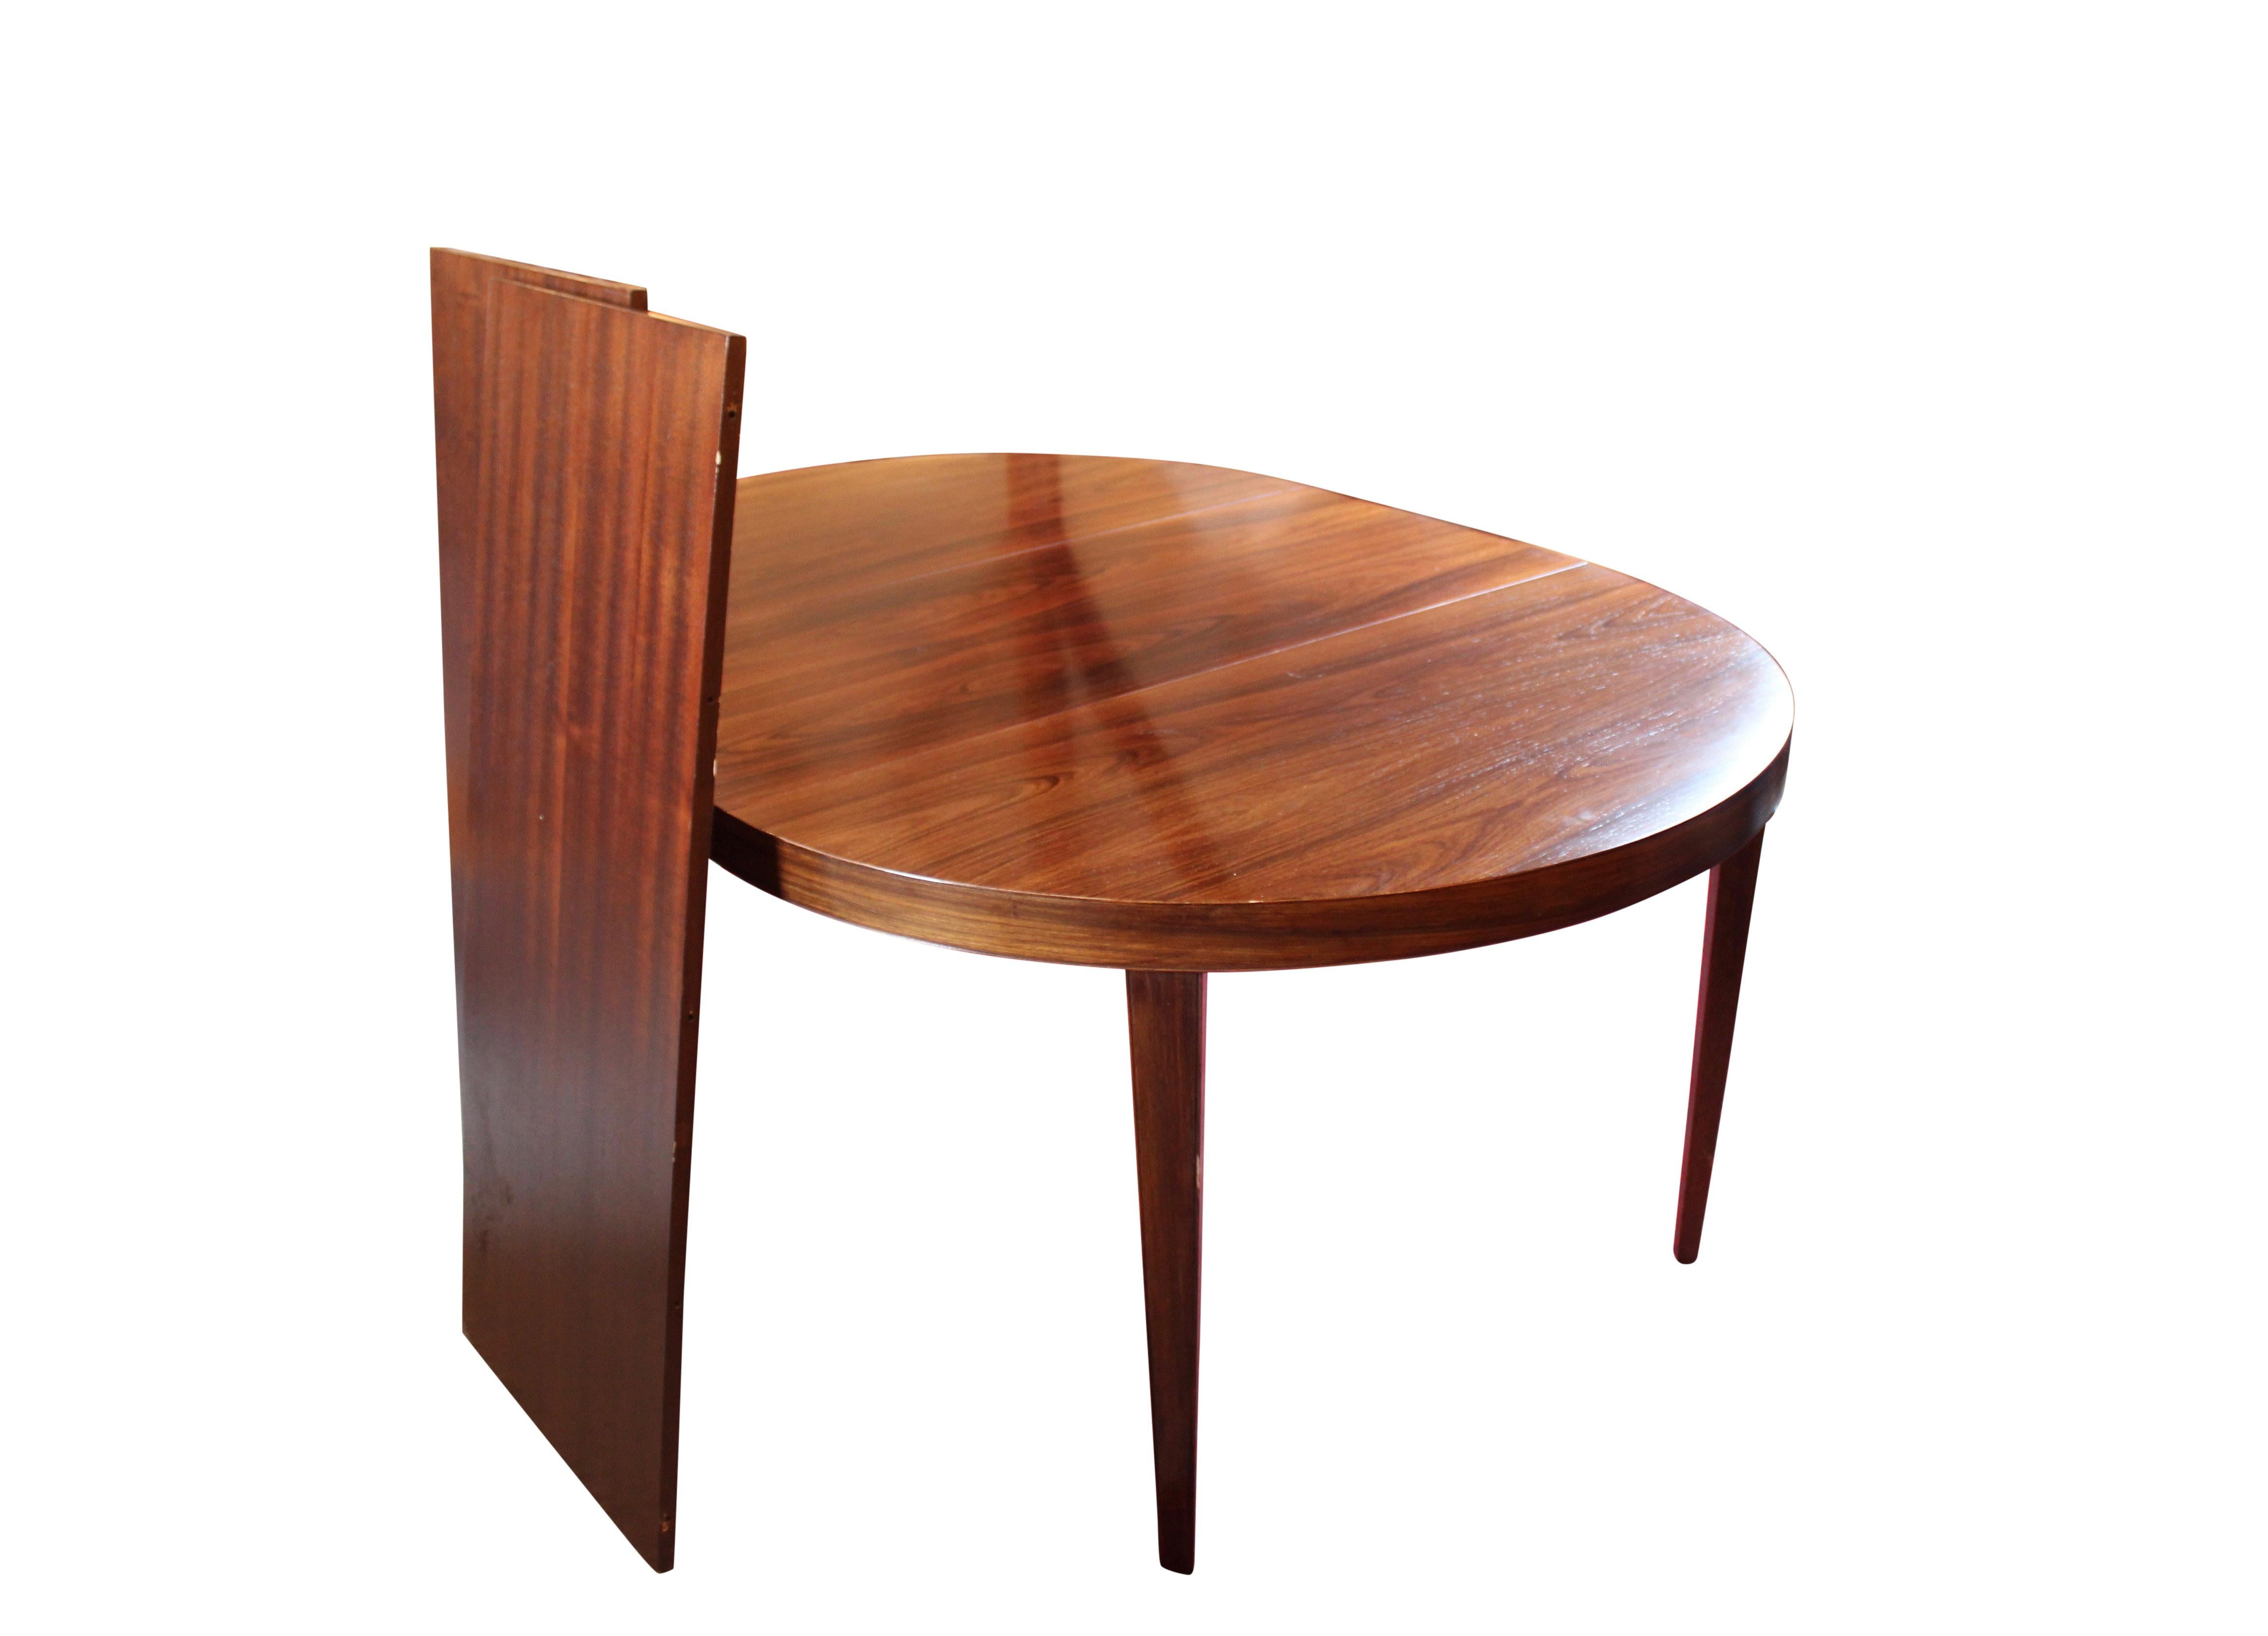 Large dining table with 3 extension leaves of rosewood designed by Severin Hansen for Haslev furniture factory in the 1960s. The table is in great vintage condition.